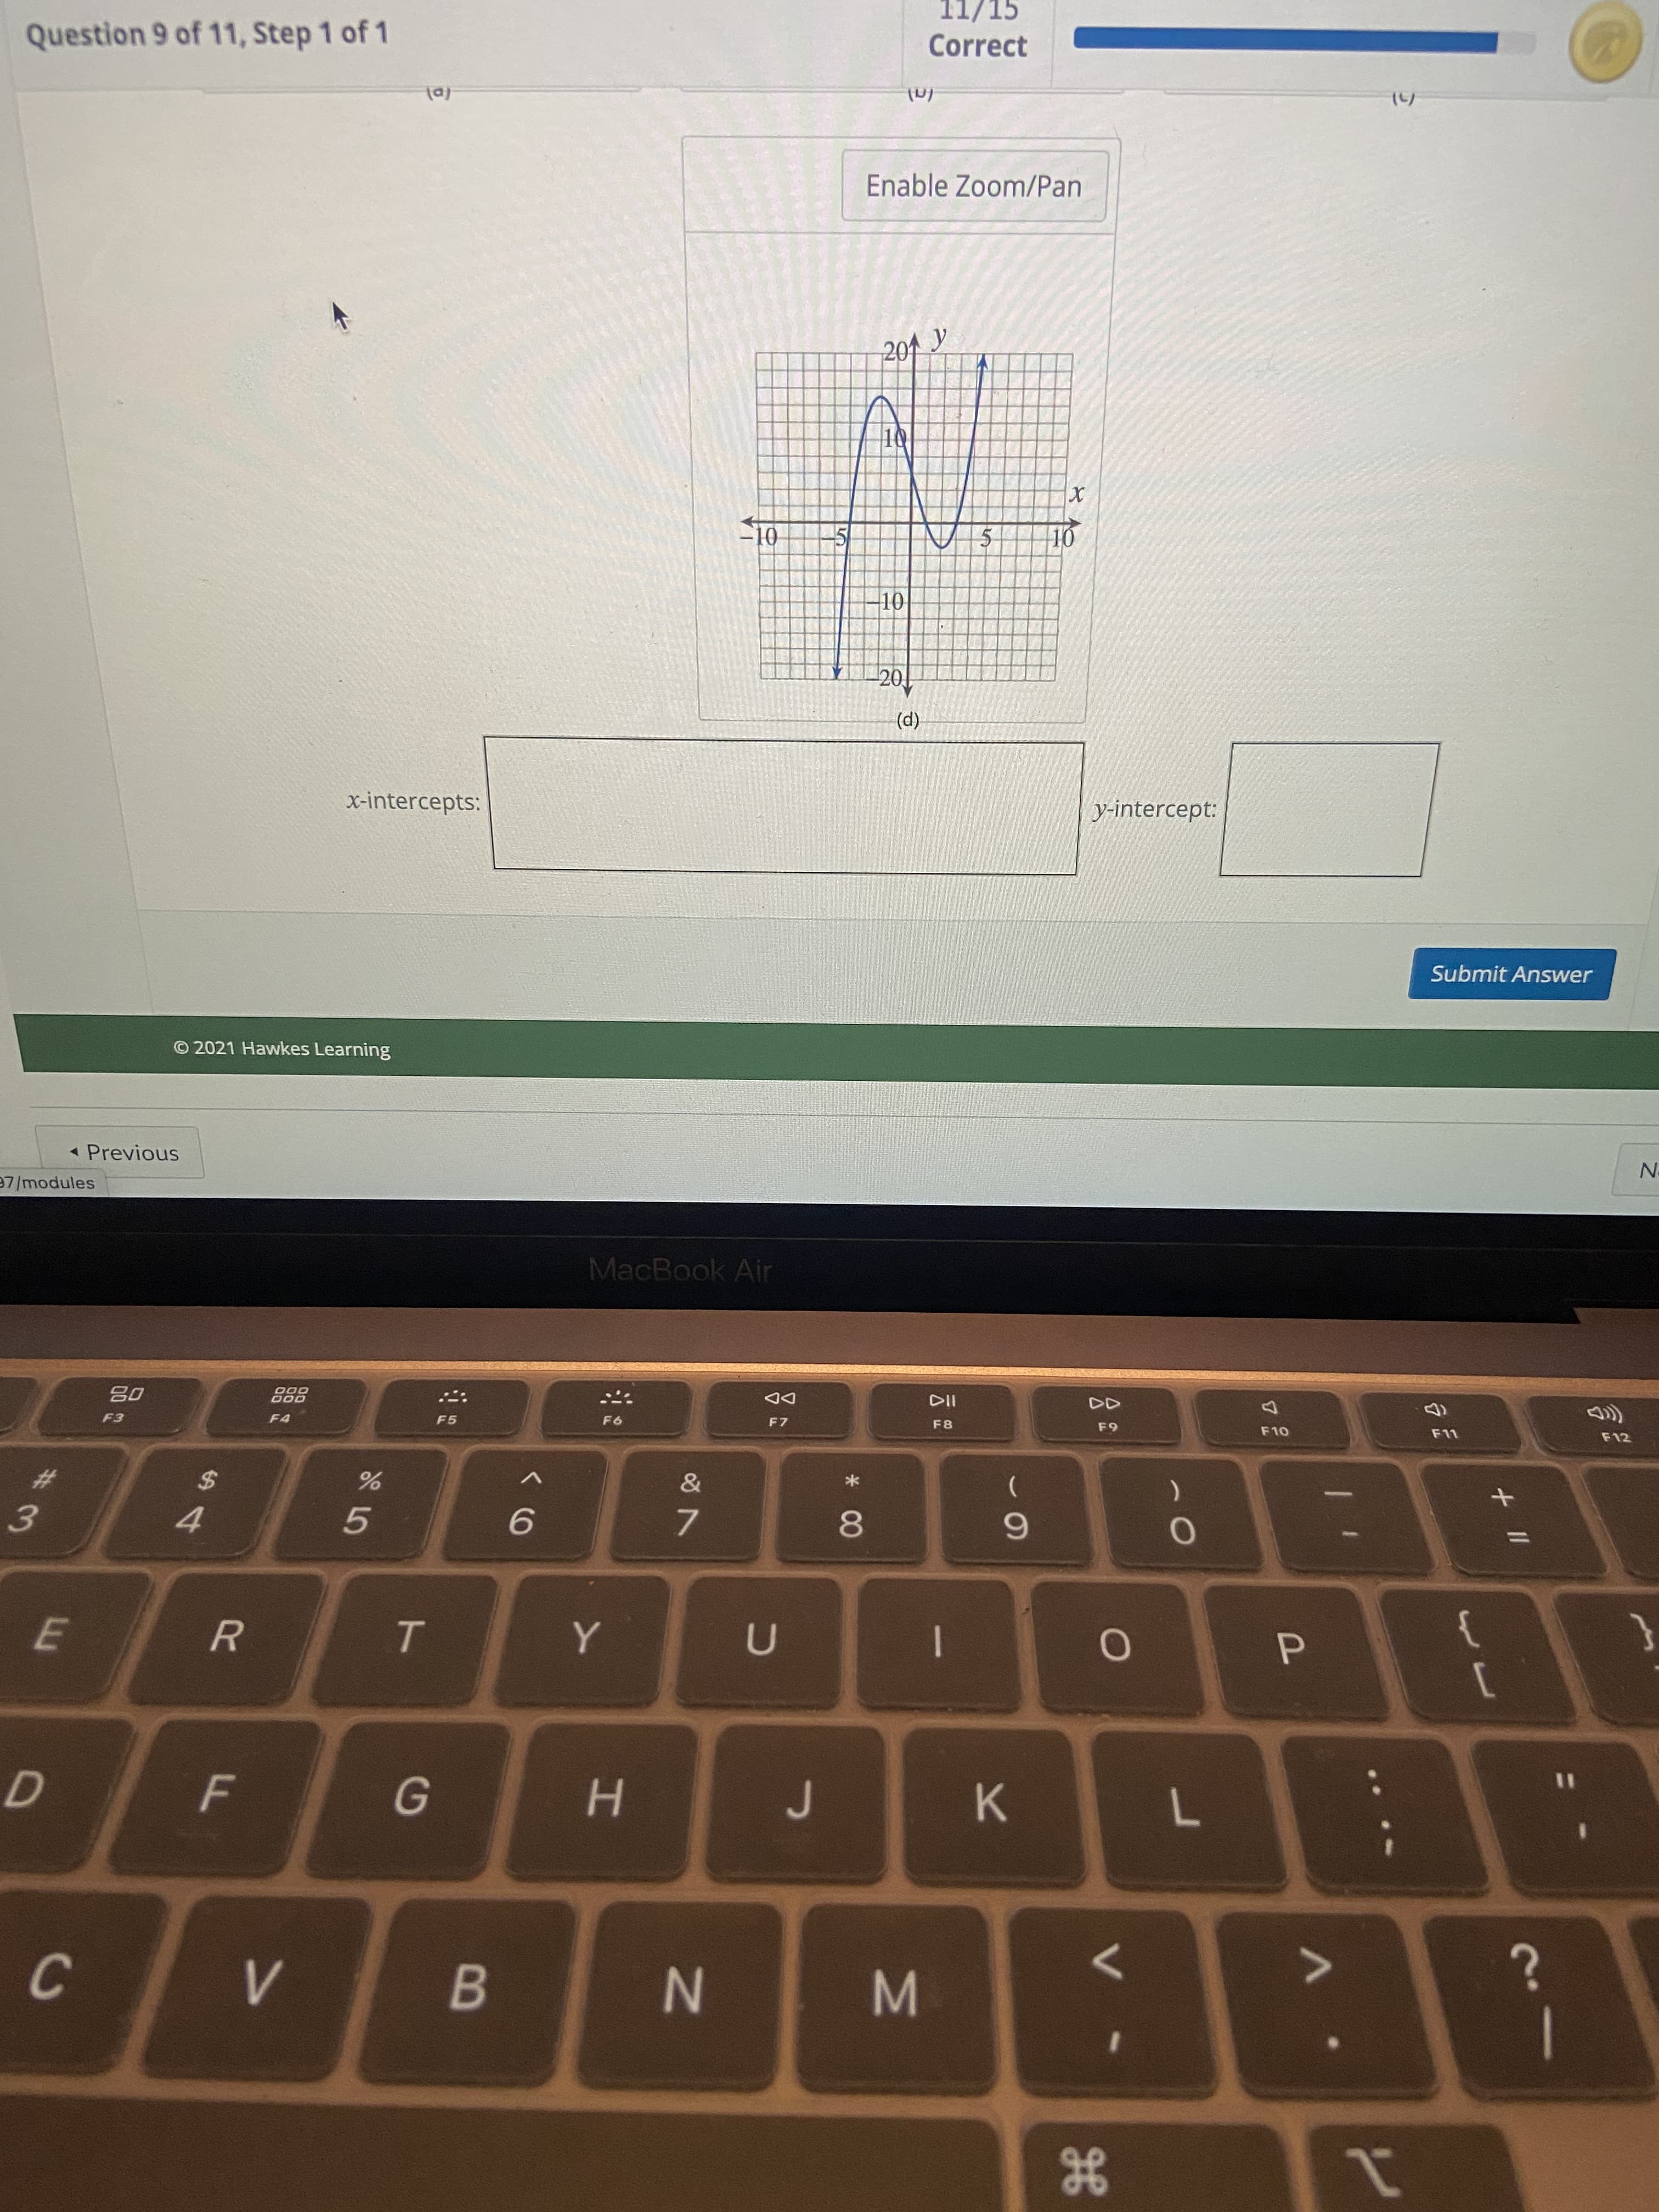 He
* 00
IN
TO
11/15
Correct
Question 9 of 11, Step 1 of 1
Enable Zoom/Pan
201y
01-
(p)
y-intercept:
x-intercepts:
Submit Answer
© 2021 Hawkes Learning
« Previous
MacBook Air
97/modules
F12
F8
DD
000
000
F5
6.
7.
24
4.
1
%23
5.
%3D
R.
K.
7.
B
C.
1
